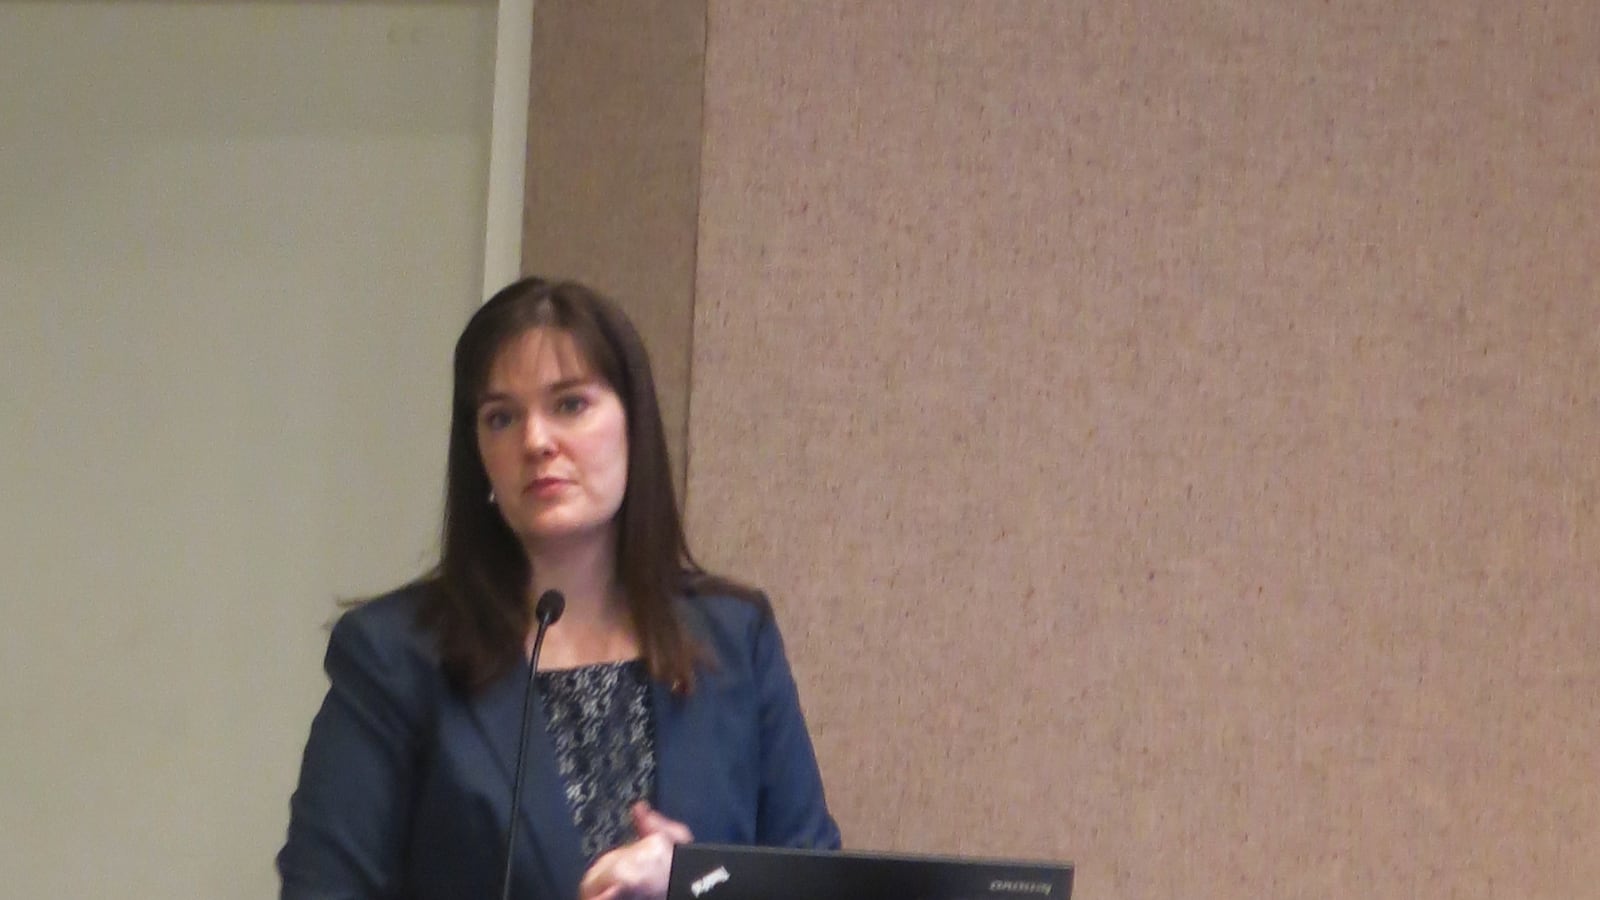 Education Commissioner Candice McQueen presents information about possible changes to the state's accountability system at the second meeting of this year's testing task force.